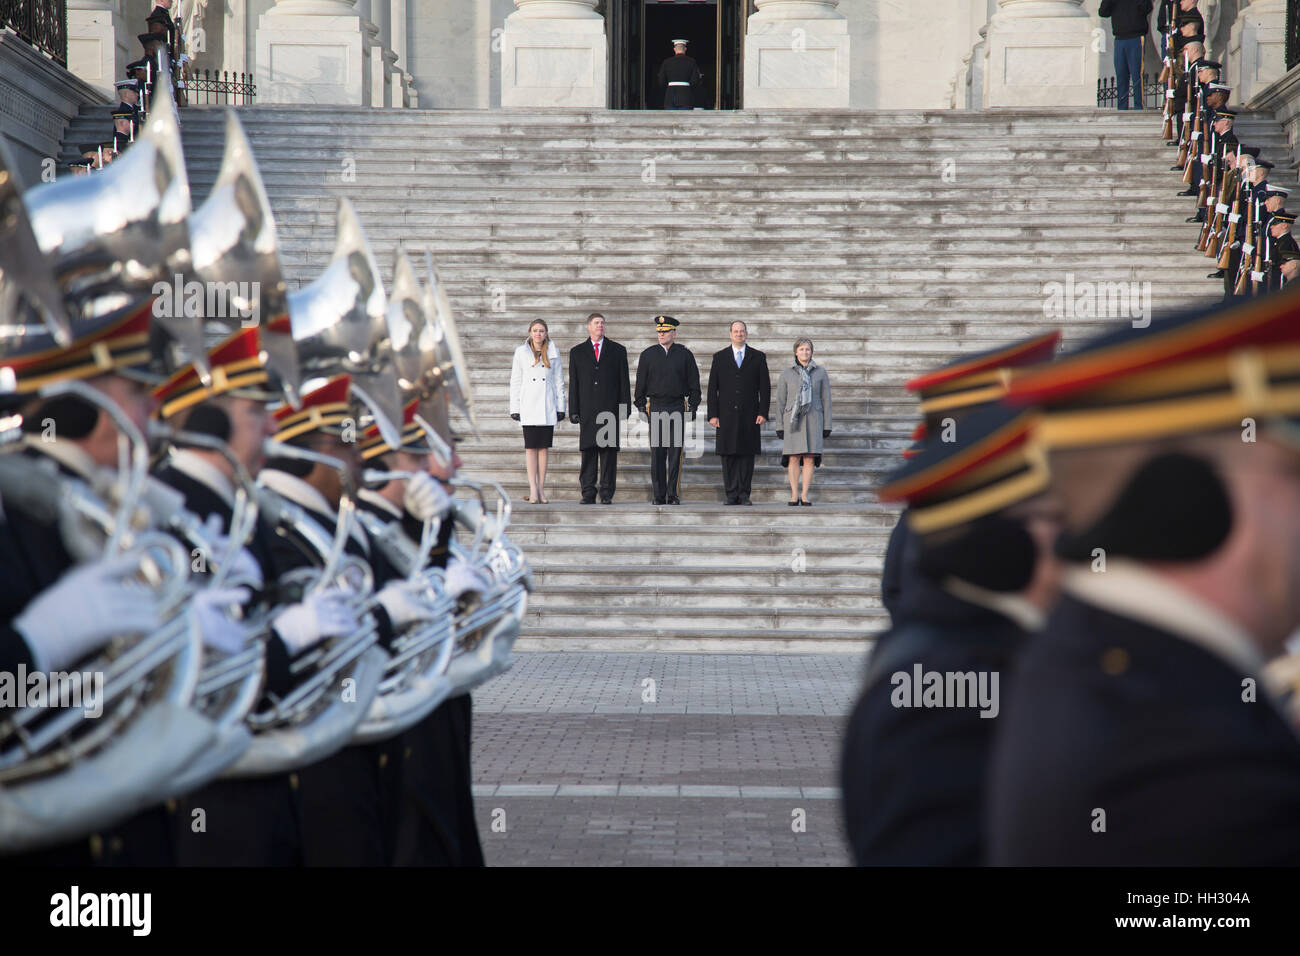 Washington, D.C, USA. 15th January, 2017. The military stand-ins for the President, Vice President and their wives, salute the troops from the steps of the U.S. Capitol Building for the Pass and Review during the Department of Defense Dress Rehearsal for the 58th Presidential Inauguration ceremony in Washington D.C., USA. Donald Trump will be sworn-in as the 45th President of the United States on January 20th. Credit: Planetpix/Alamy Live News Stock Photo